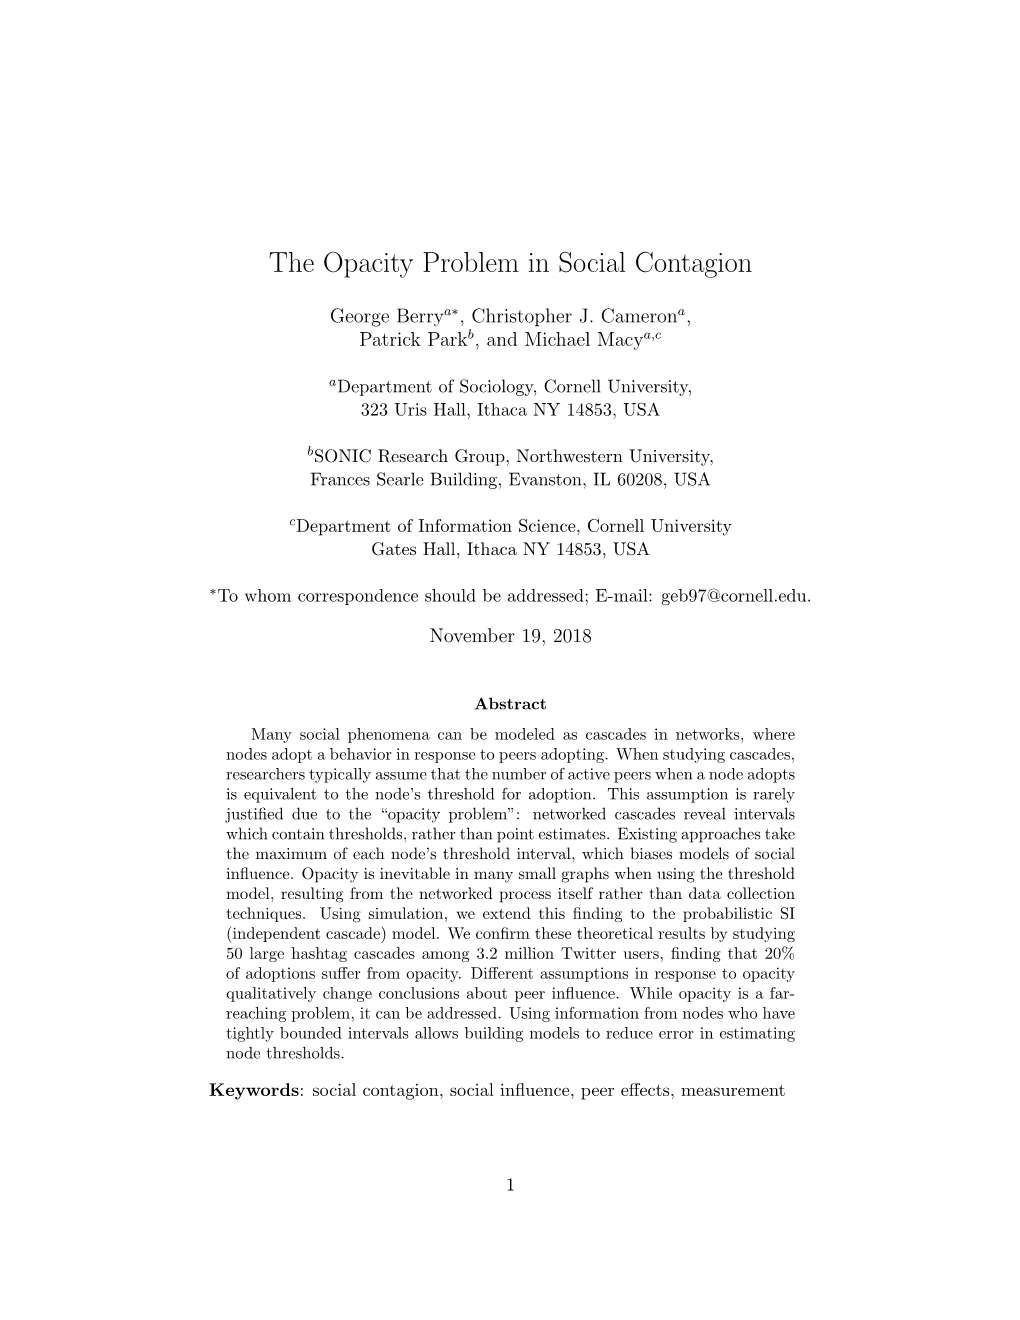 The Opacity Problem in Social Contagion